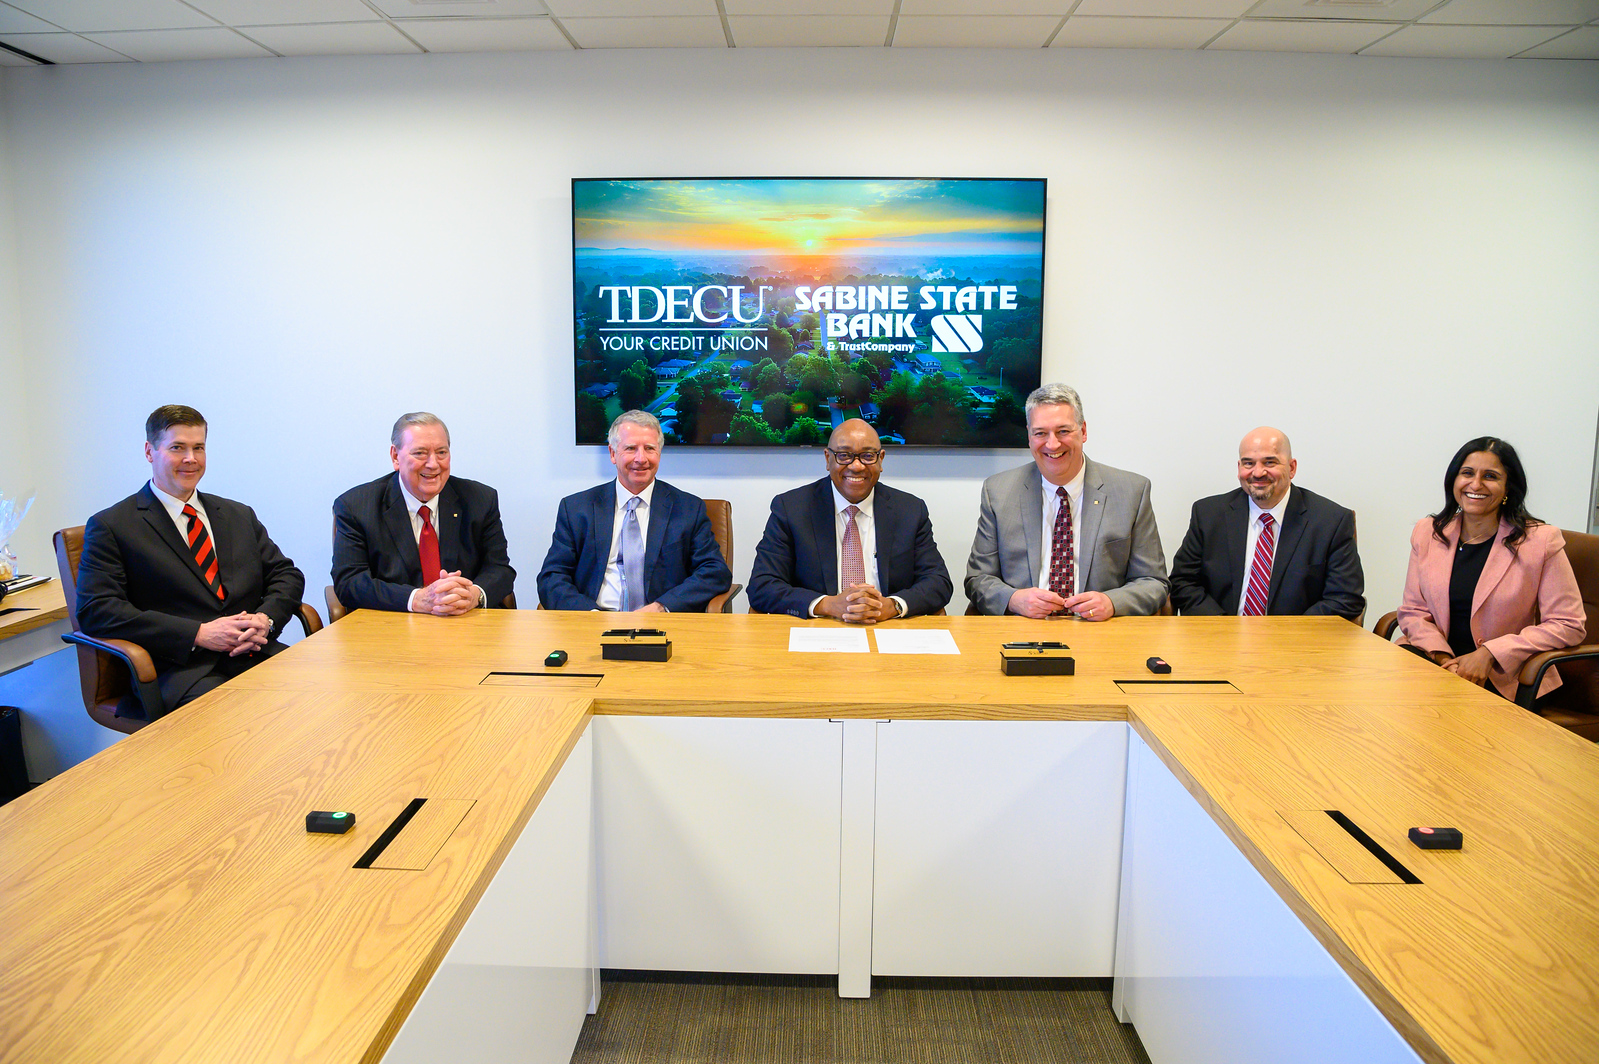 From L to R: Paul Sklar, Chief Financial Officer of Sabine State Bank and Trust; Lee McCann, President and CEO of Sabine State Bank and Trust; Dave Sikora, TDECU Board Chairman; Isaac Johnson, TDECU President and CEO; Jim Cole, Sabine Board Chairman; John Whitehead, General Counsel and Chief Compliance Officer of Sabine State Bank and Trust; Aparna Dave, TDECU Chief Legal Officer and General Counsel